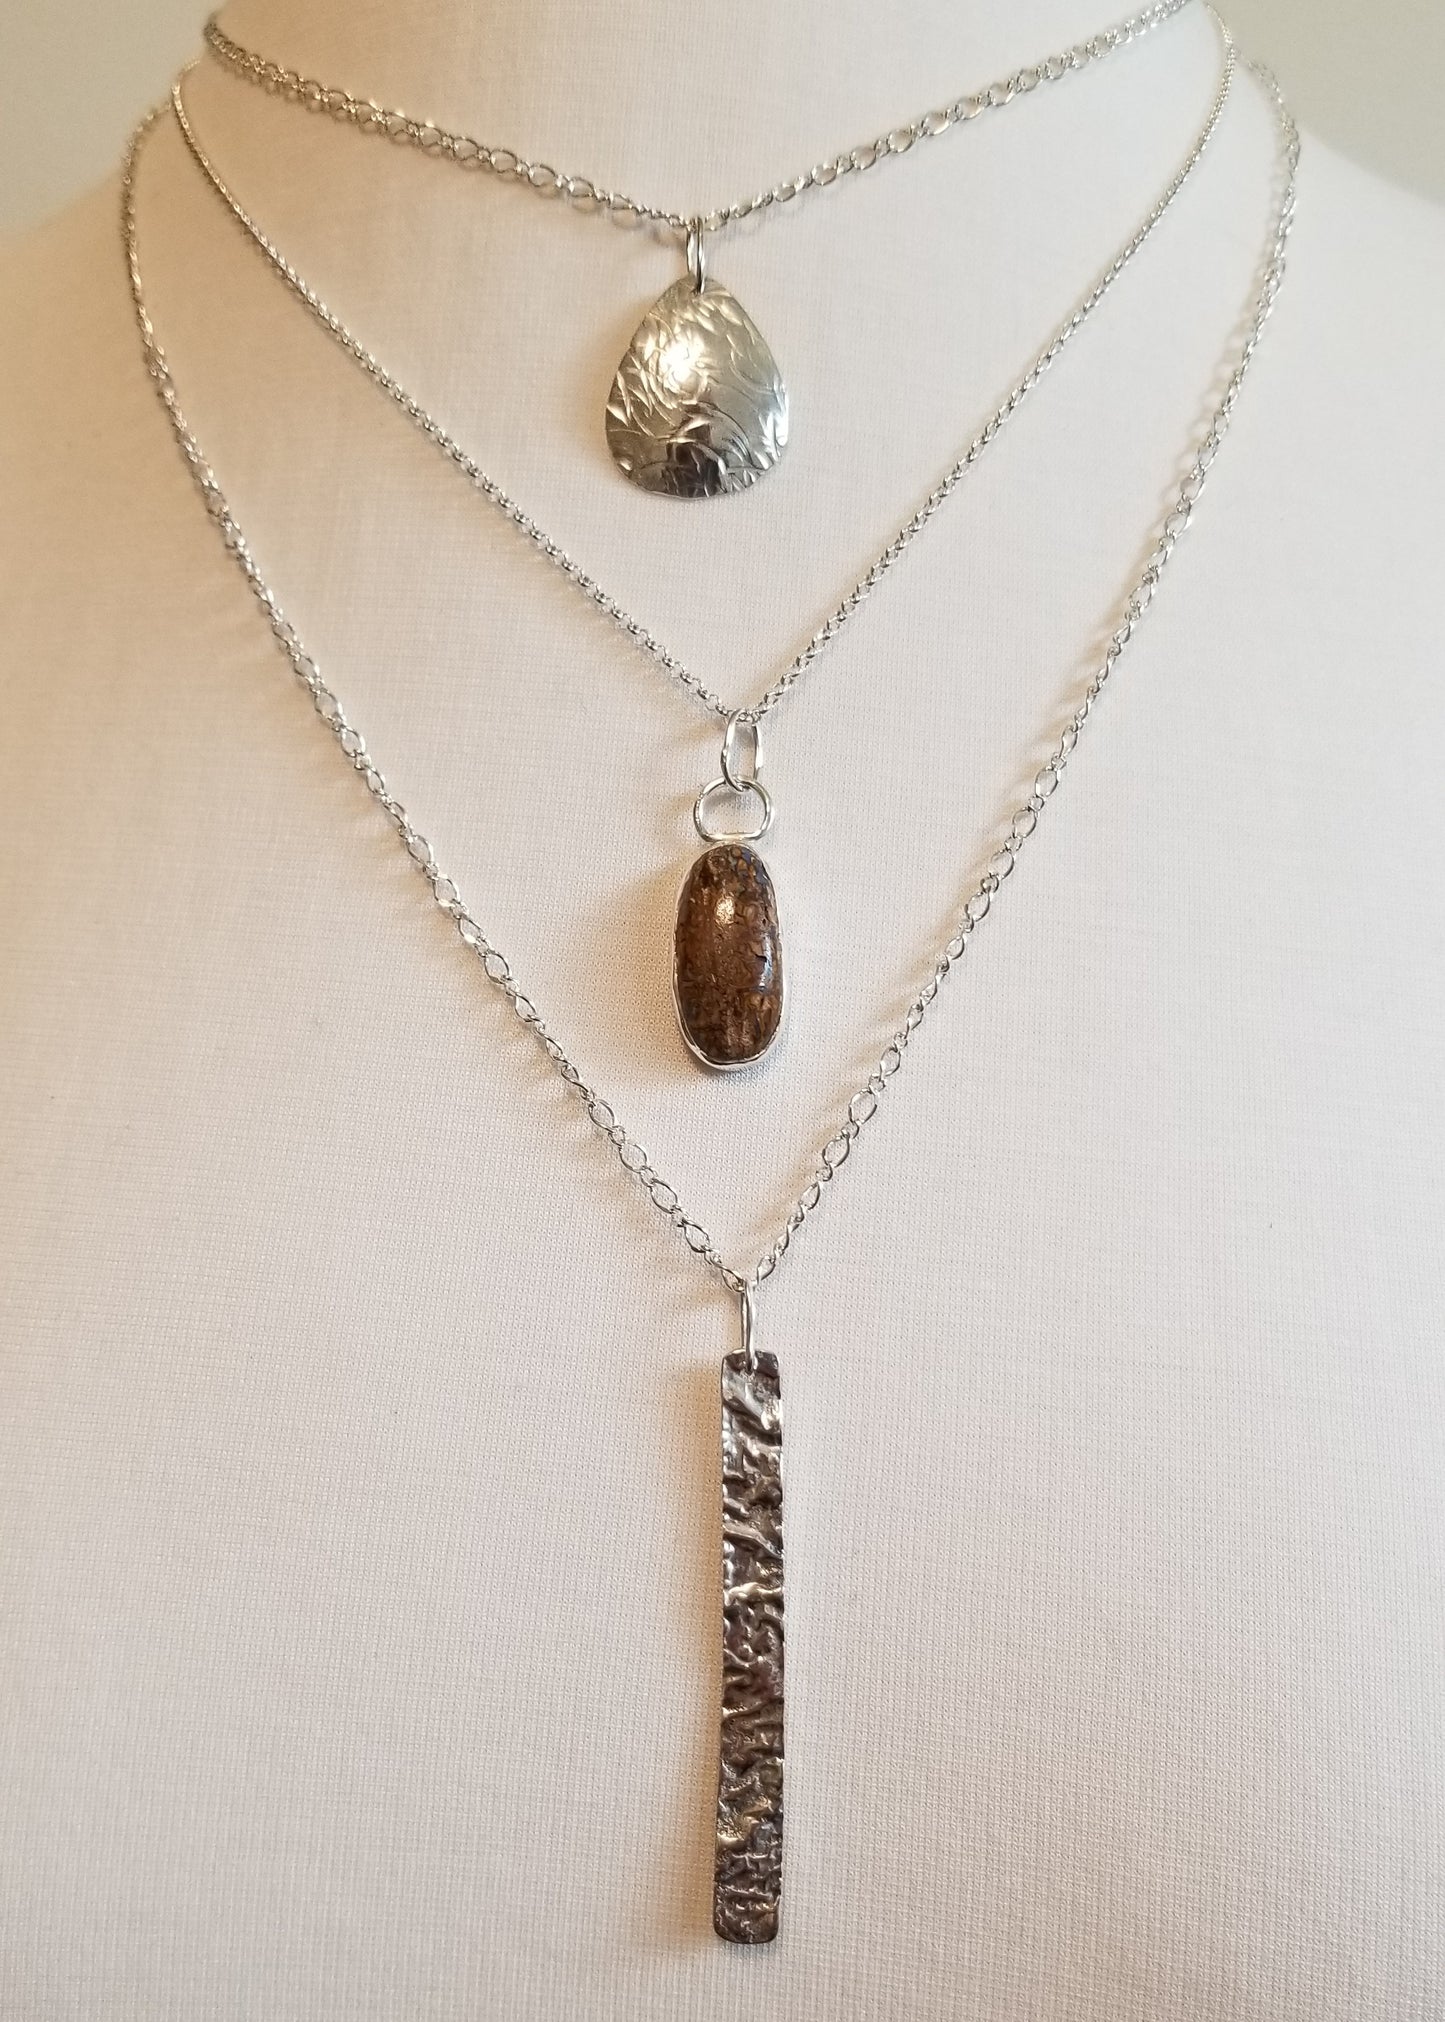 Triple Strand Necklace with Silver and Boulder Opal